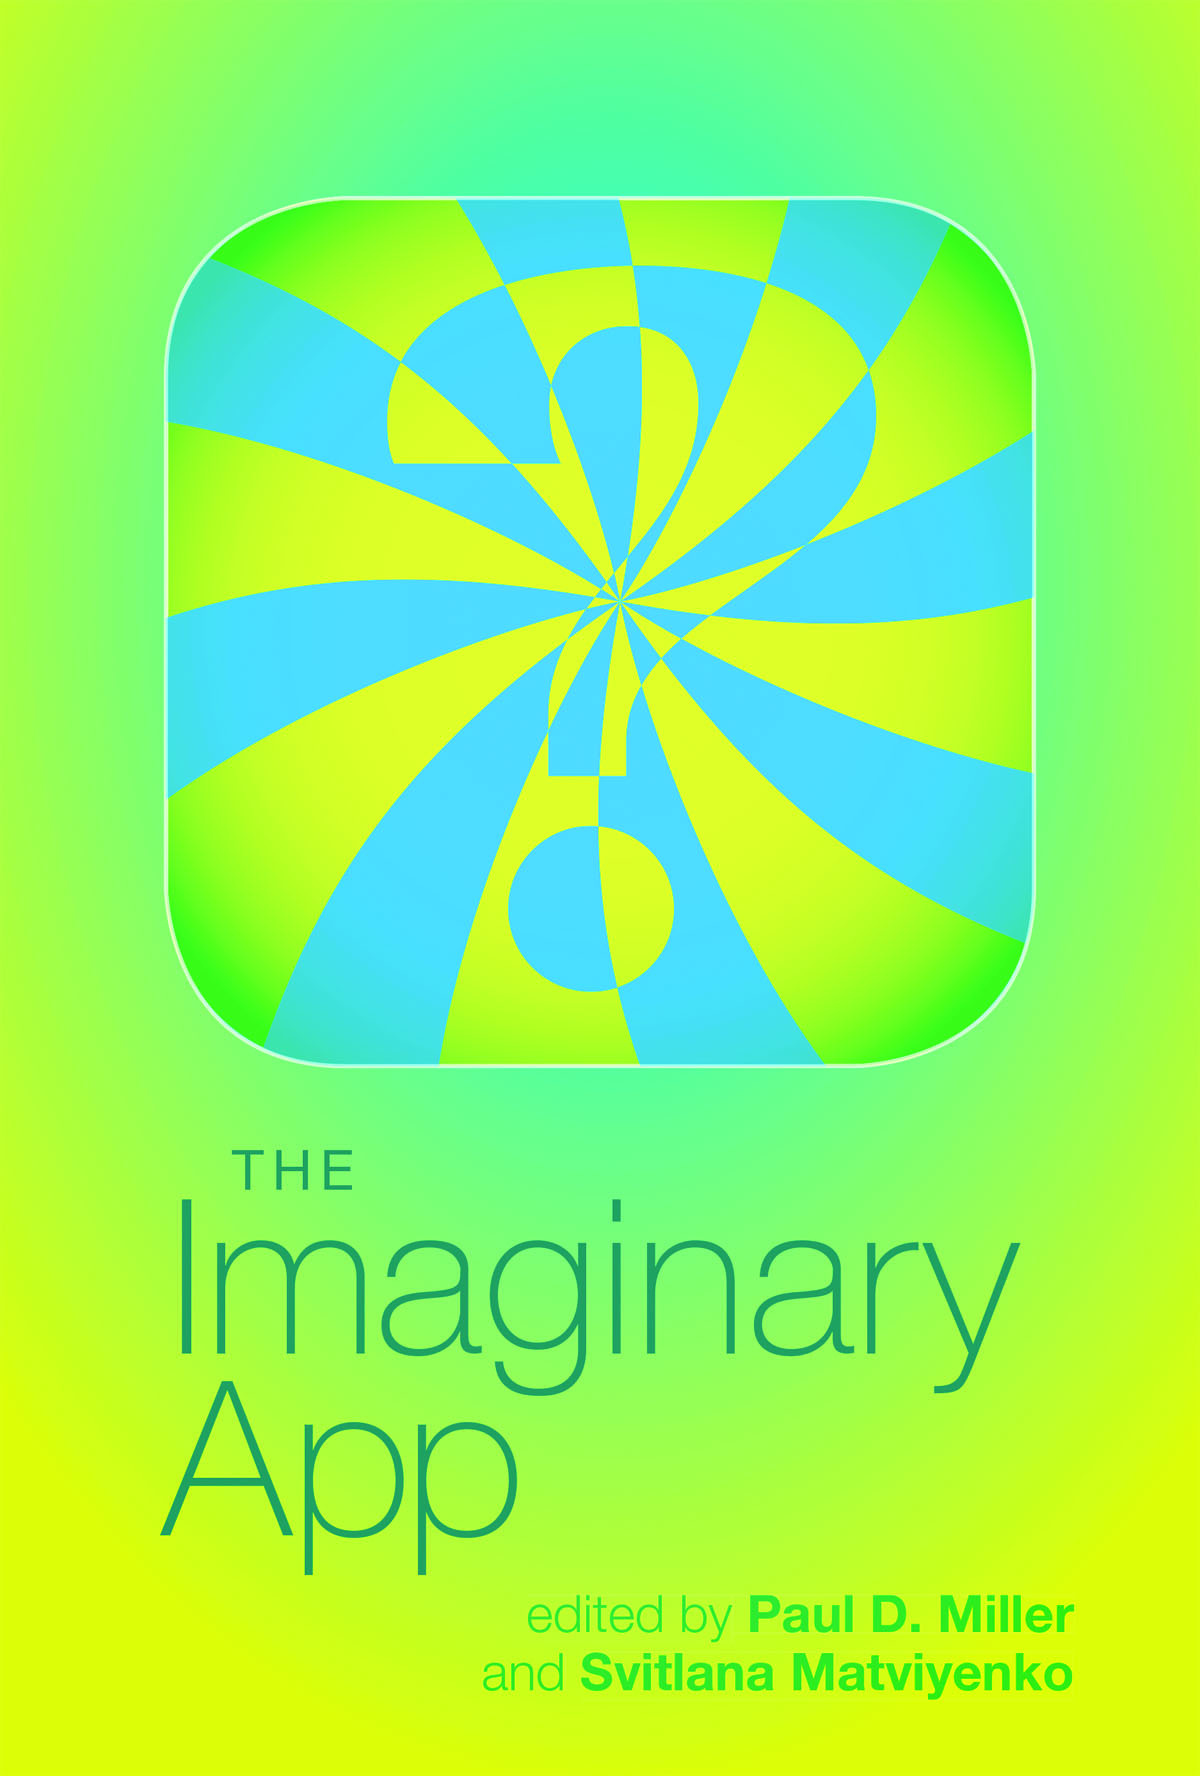 The cover of the book "The Imaginary App" by Paul D. Miller and Svitlana Matviyenko